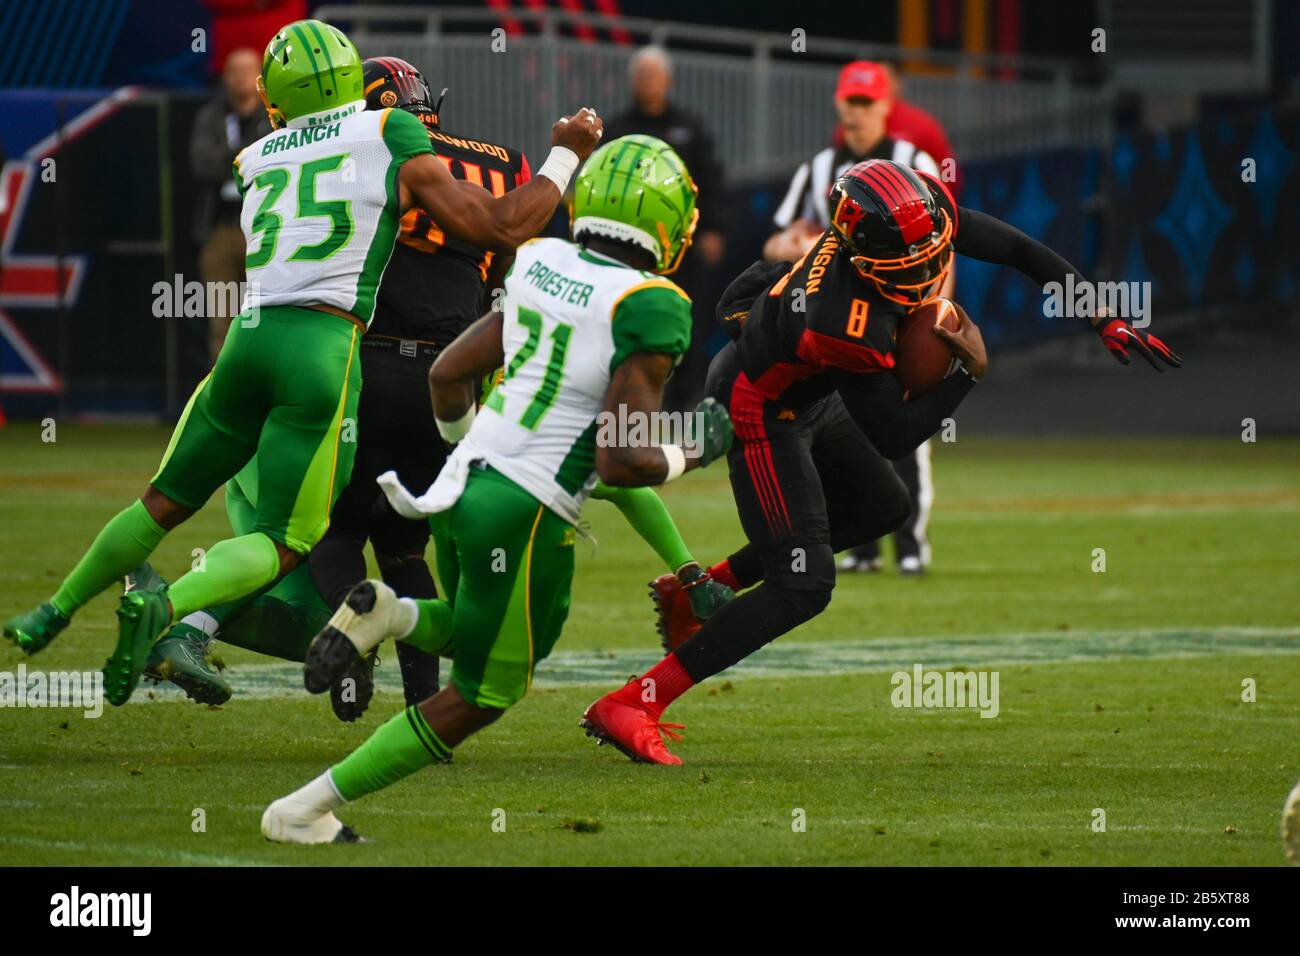 LA Wildcats quarterback Josh Johnson (8) runs with the ball during an XFL football game against the Tampa Bay Vipers, Sunday, March 8, 2020, in Carson, California, USA. (Photo by IOS/ESPA-Images) Stock Photo